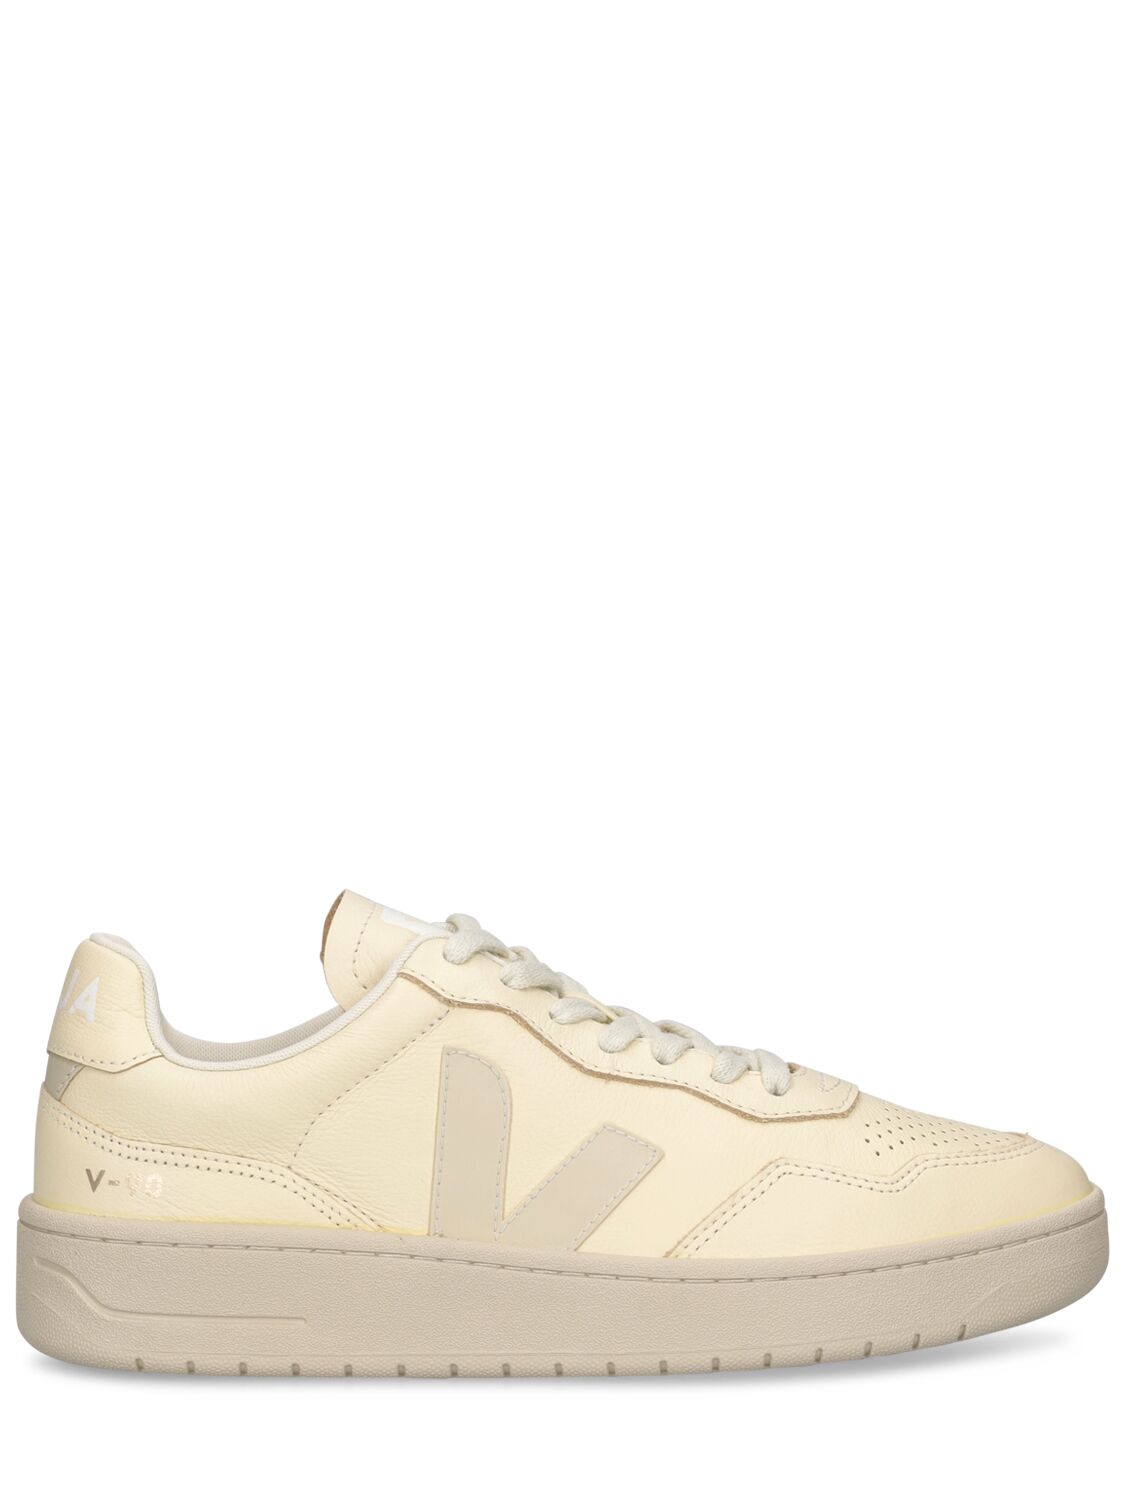 Image of V-90 Leather Sneakers